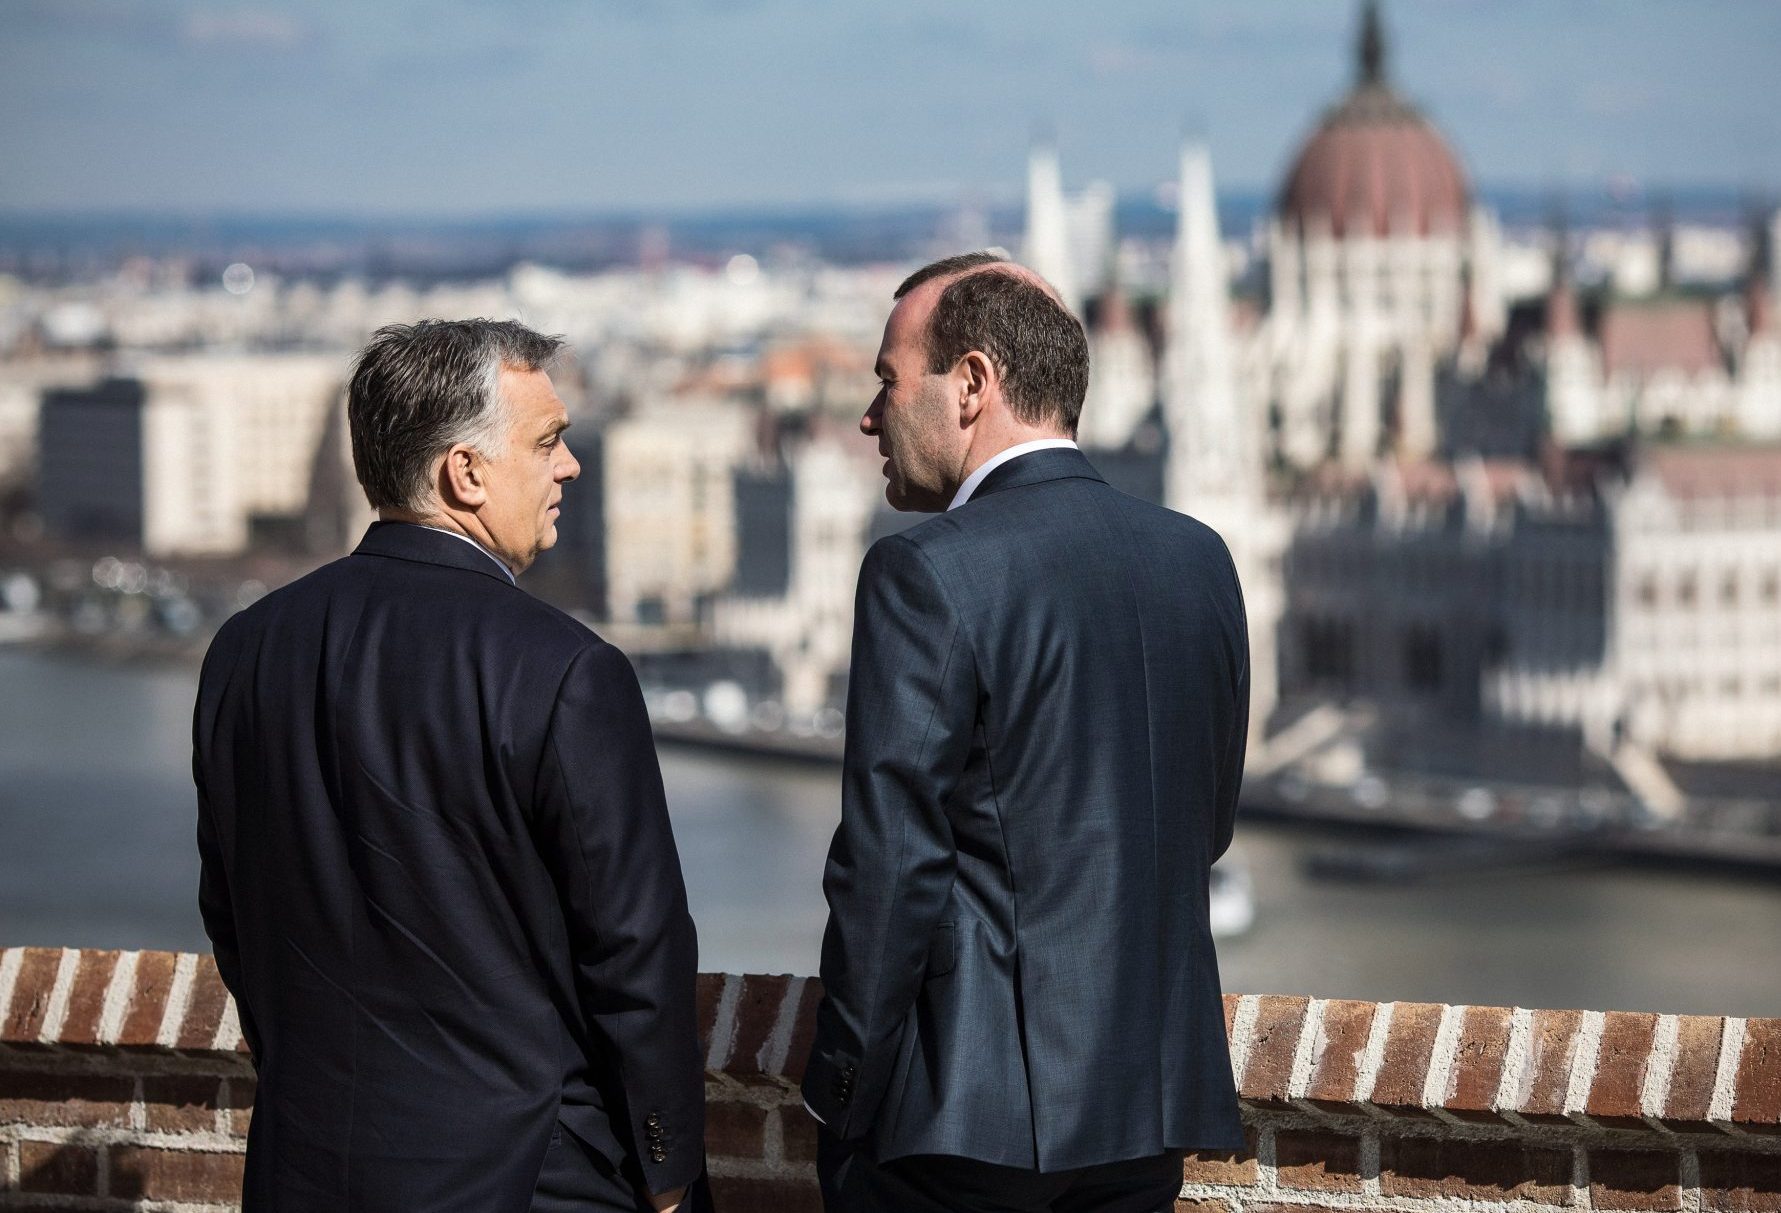 Orbán and Weber: From Total Support to Public Break-Up